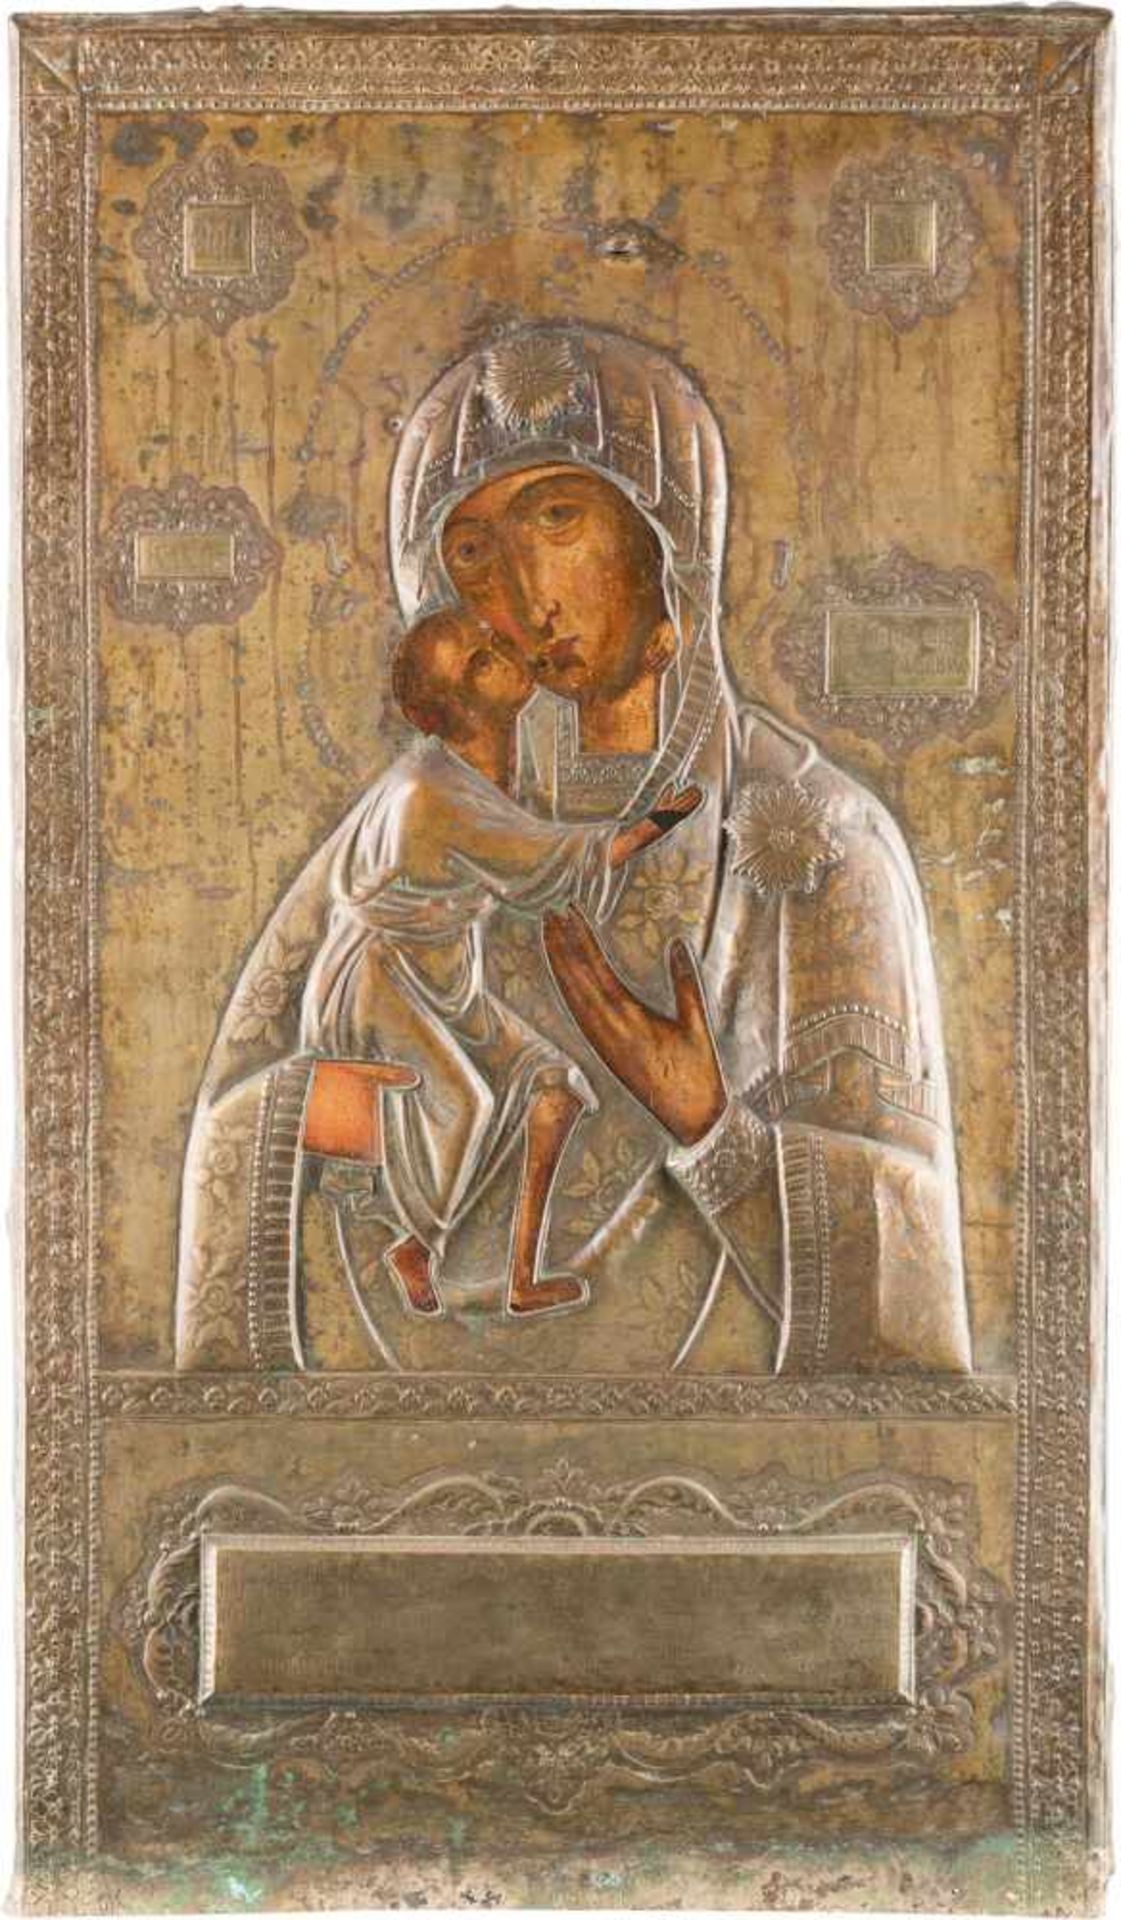 A MONUMENTAL ICON SHOWING THE FEODOROVSKAYA MOTHER OF GOD WITH OKLAD